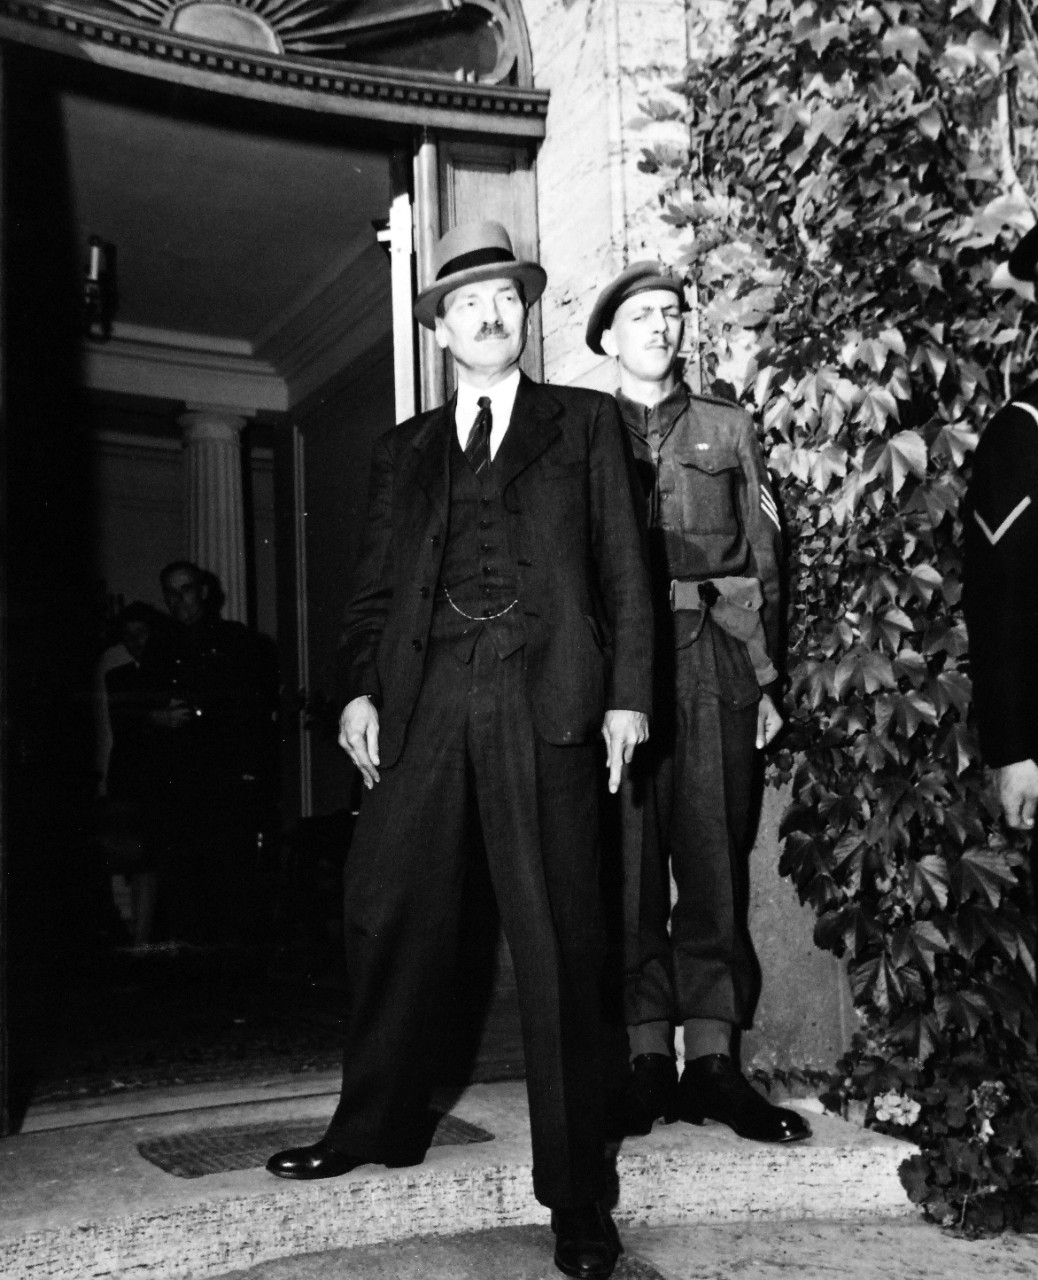 80-G-700187: Potsdam Conference, July-August 1945. Clement Atlee, new Prime Minister of Great Britain, returns to Potsdam, Germany, for further “Big Three” conferences.   He is about to enter house formerly occupied by Winston Churchill.  Photographed by CPhoM William Belknap Jr., released July 28, 1945.   Official U.S. Navy Photograph, now in the collections of the National Archives.  (2016/02/23).